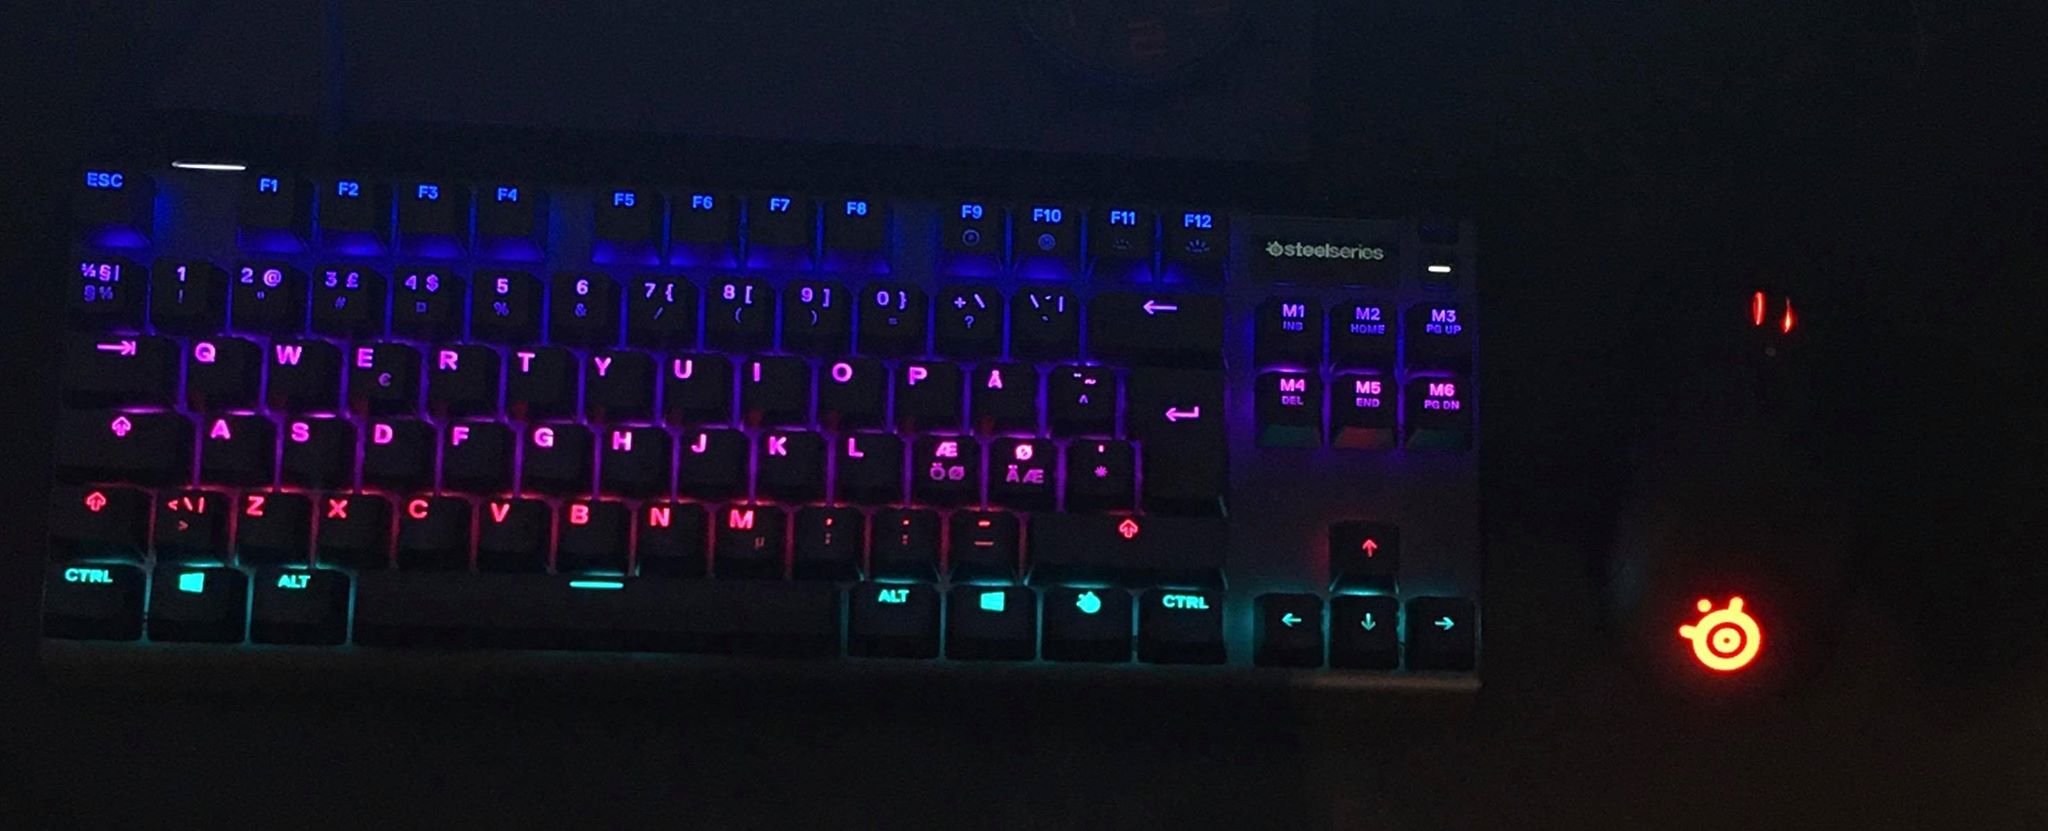 Pjeh I Ended Up Getting The Steelseries Apex Pro Tkl I Ve Never Had Such An Amazing Keyboard Its So Quiet And The Sensitivity You Can Adjust Ur Self Is Just